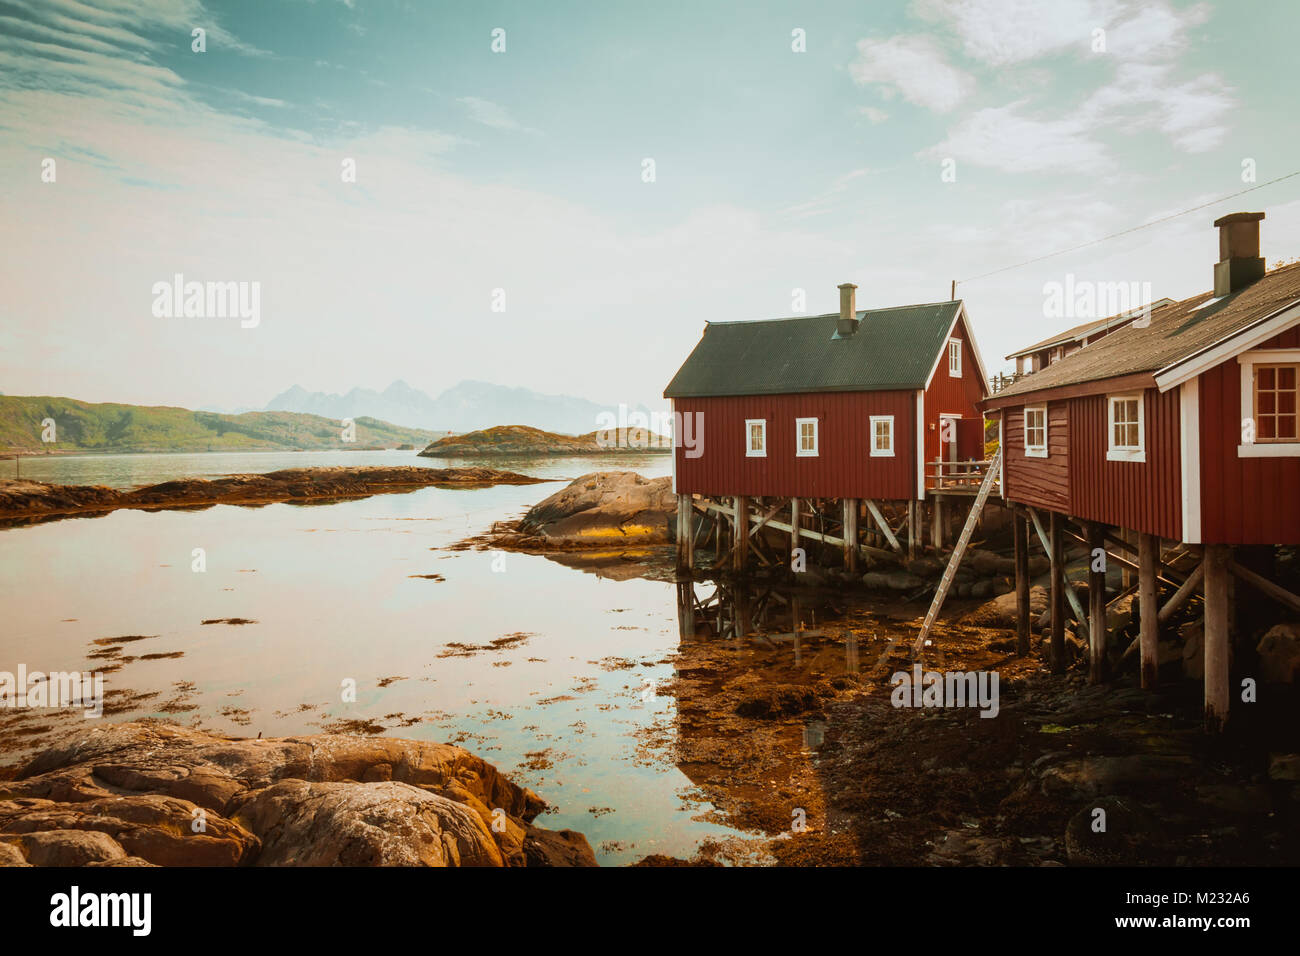 Typical red rorbu fishing hut in town of Svolvaer Stock Photo